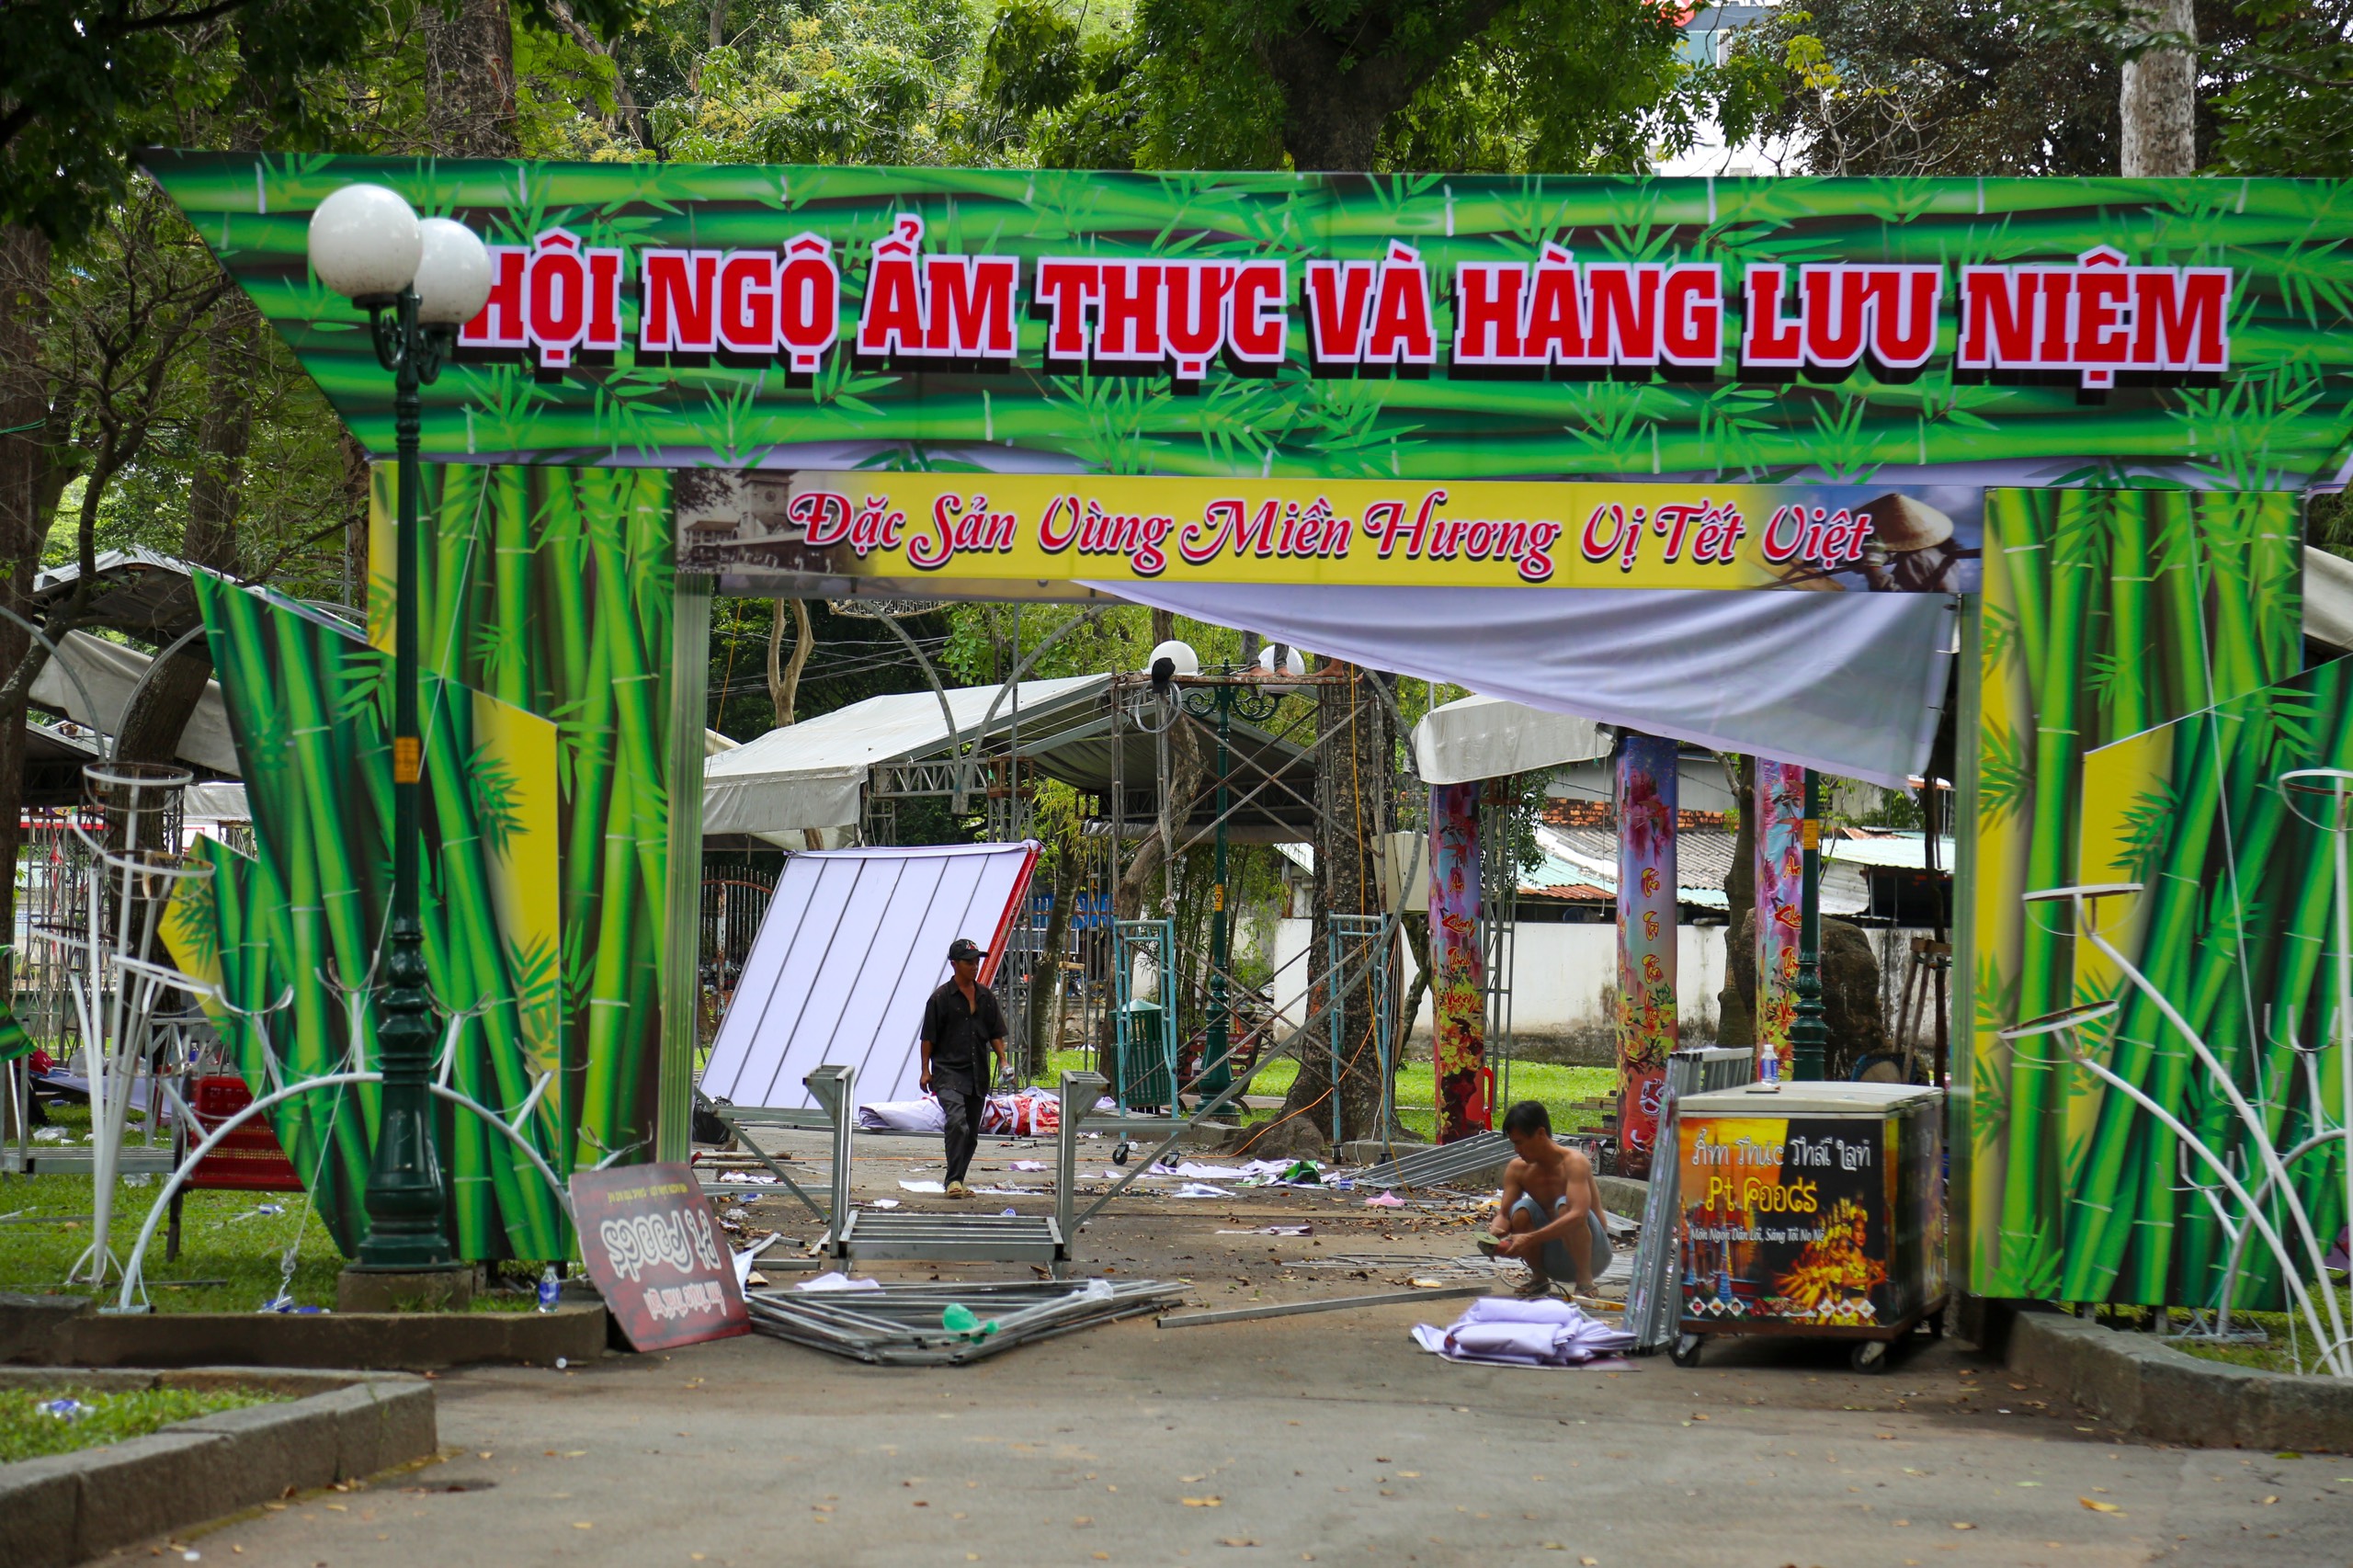 Workers set up the food and souvenir area at the Spring Flower Festival 2023 in Tao Dan Park in District 1, Ho Chi Minh City, January 11, 2023. Photo: Tuoi Tre